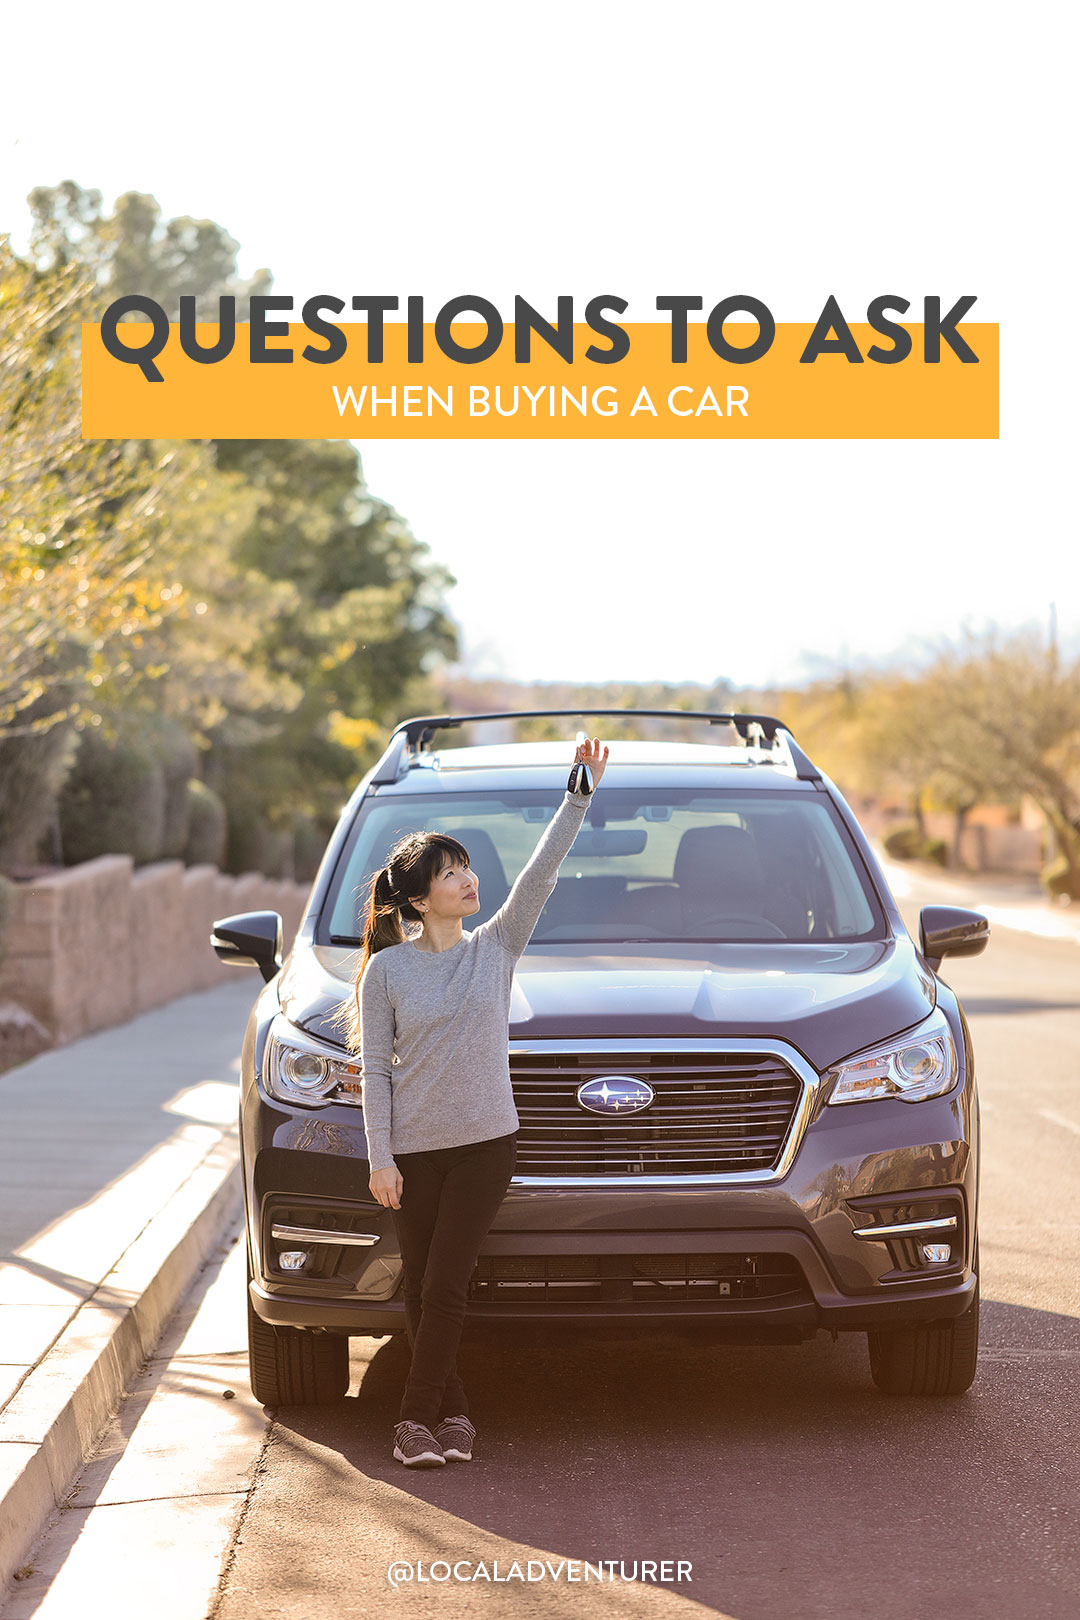 Questions to Ask When Buying a Car